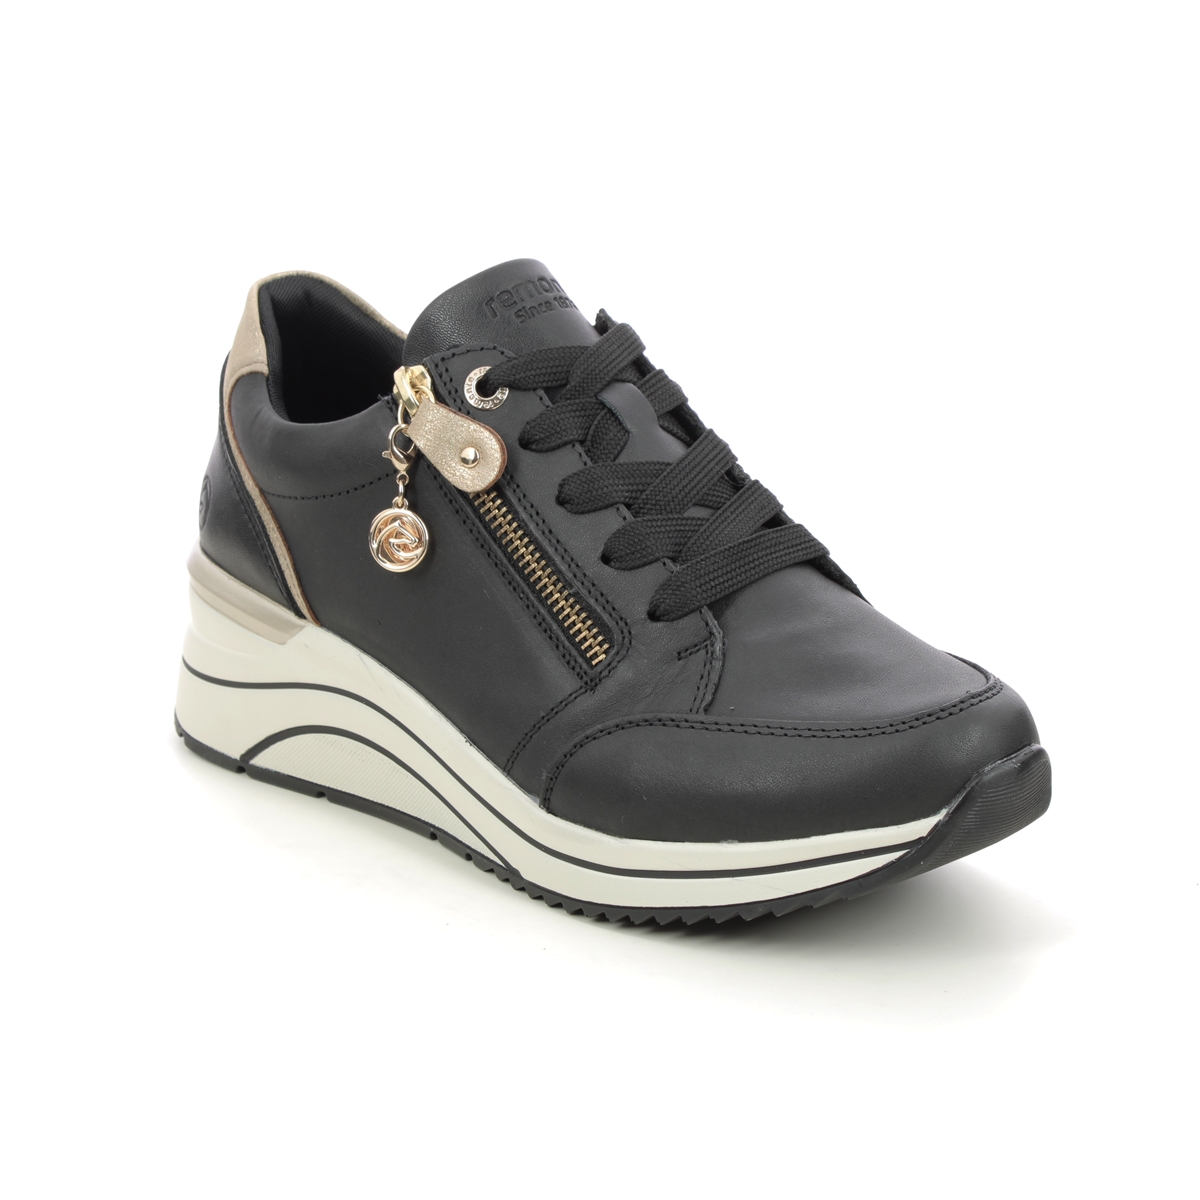 Remonte Ranzip Wedge Black Leather Womens Trainers D0T03-01 In Size 40 In Plain Black Leather